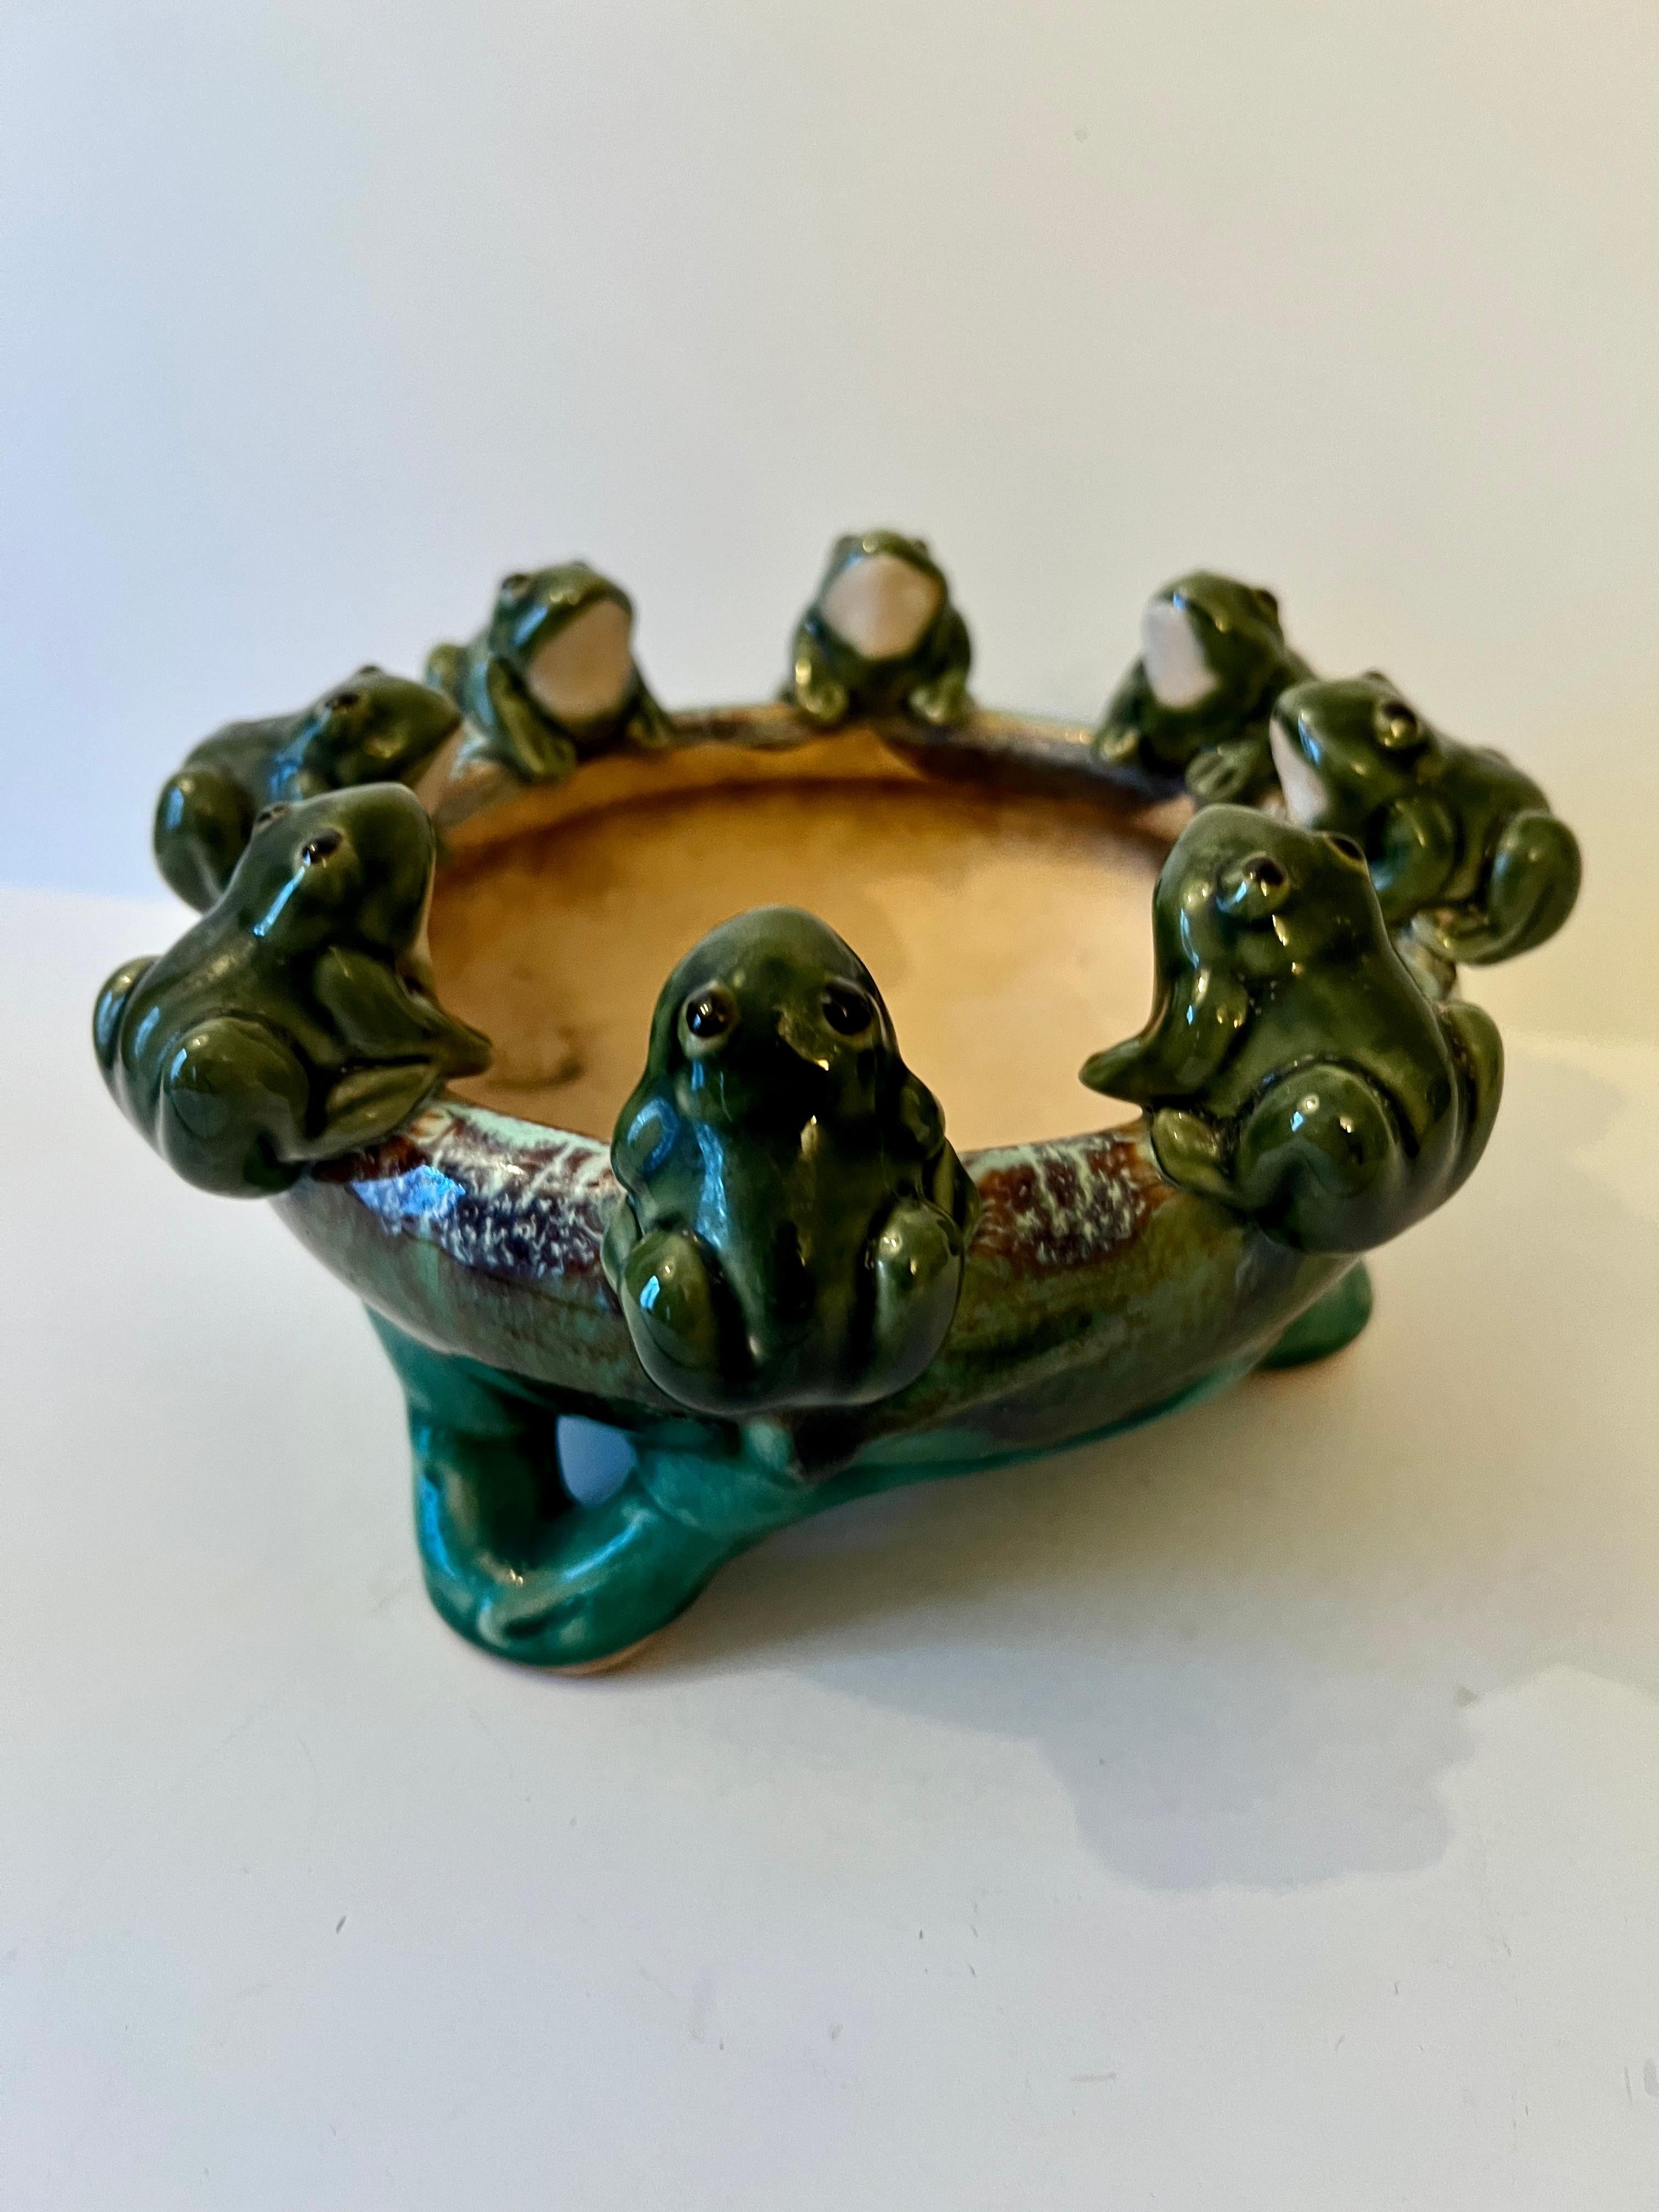 Glazed Terracotta Footed Planter or Jardiniere with Frogs  2